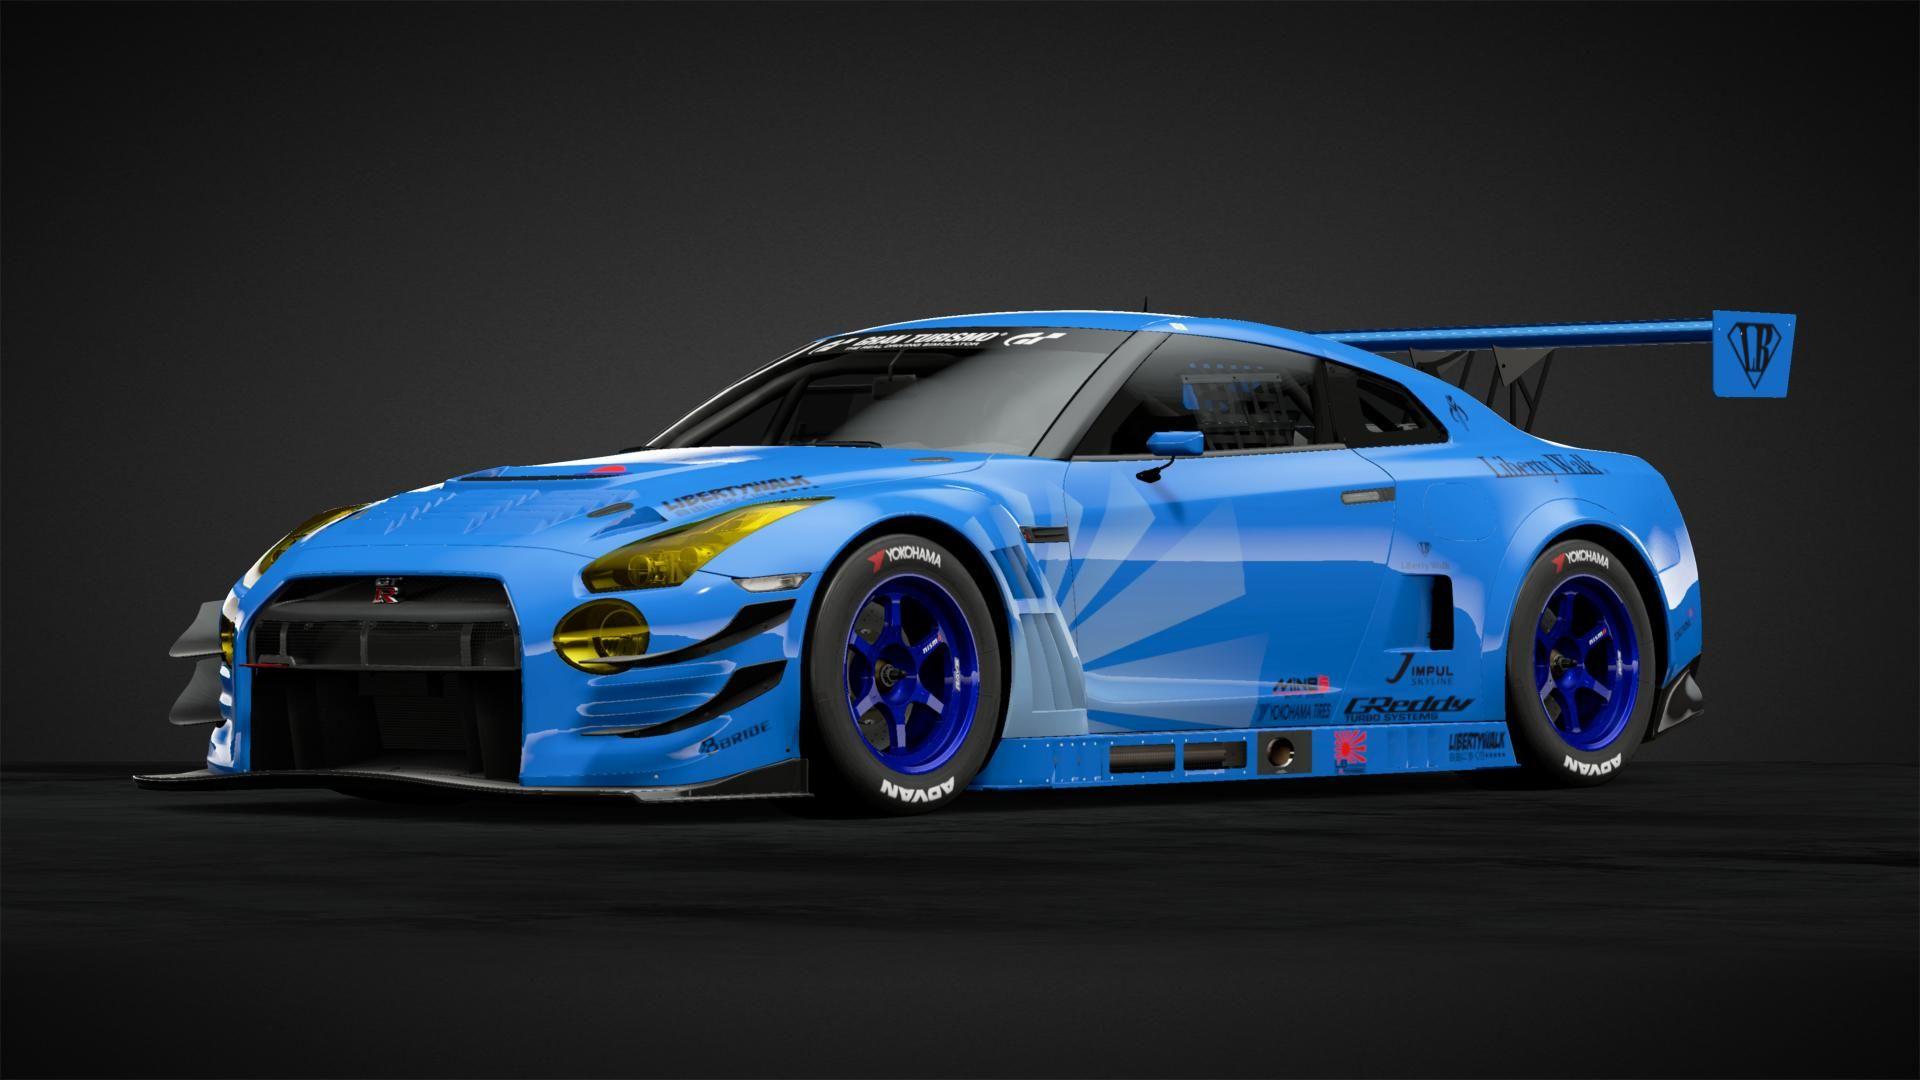 GT R NISMO GT3 Liberty Walk Livery By XASER 33. Community